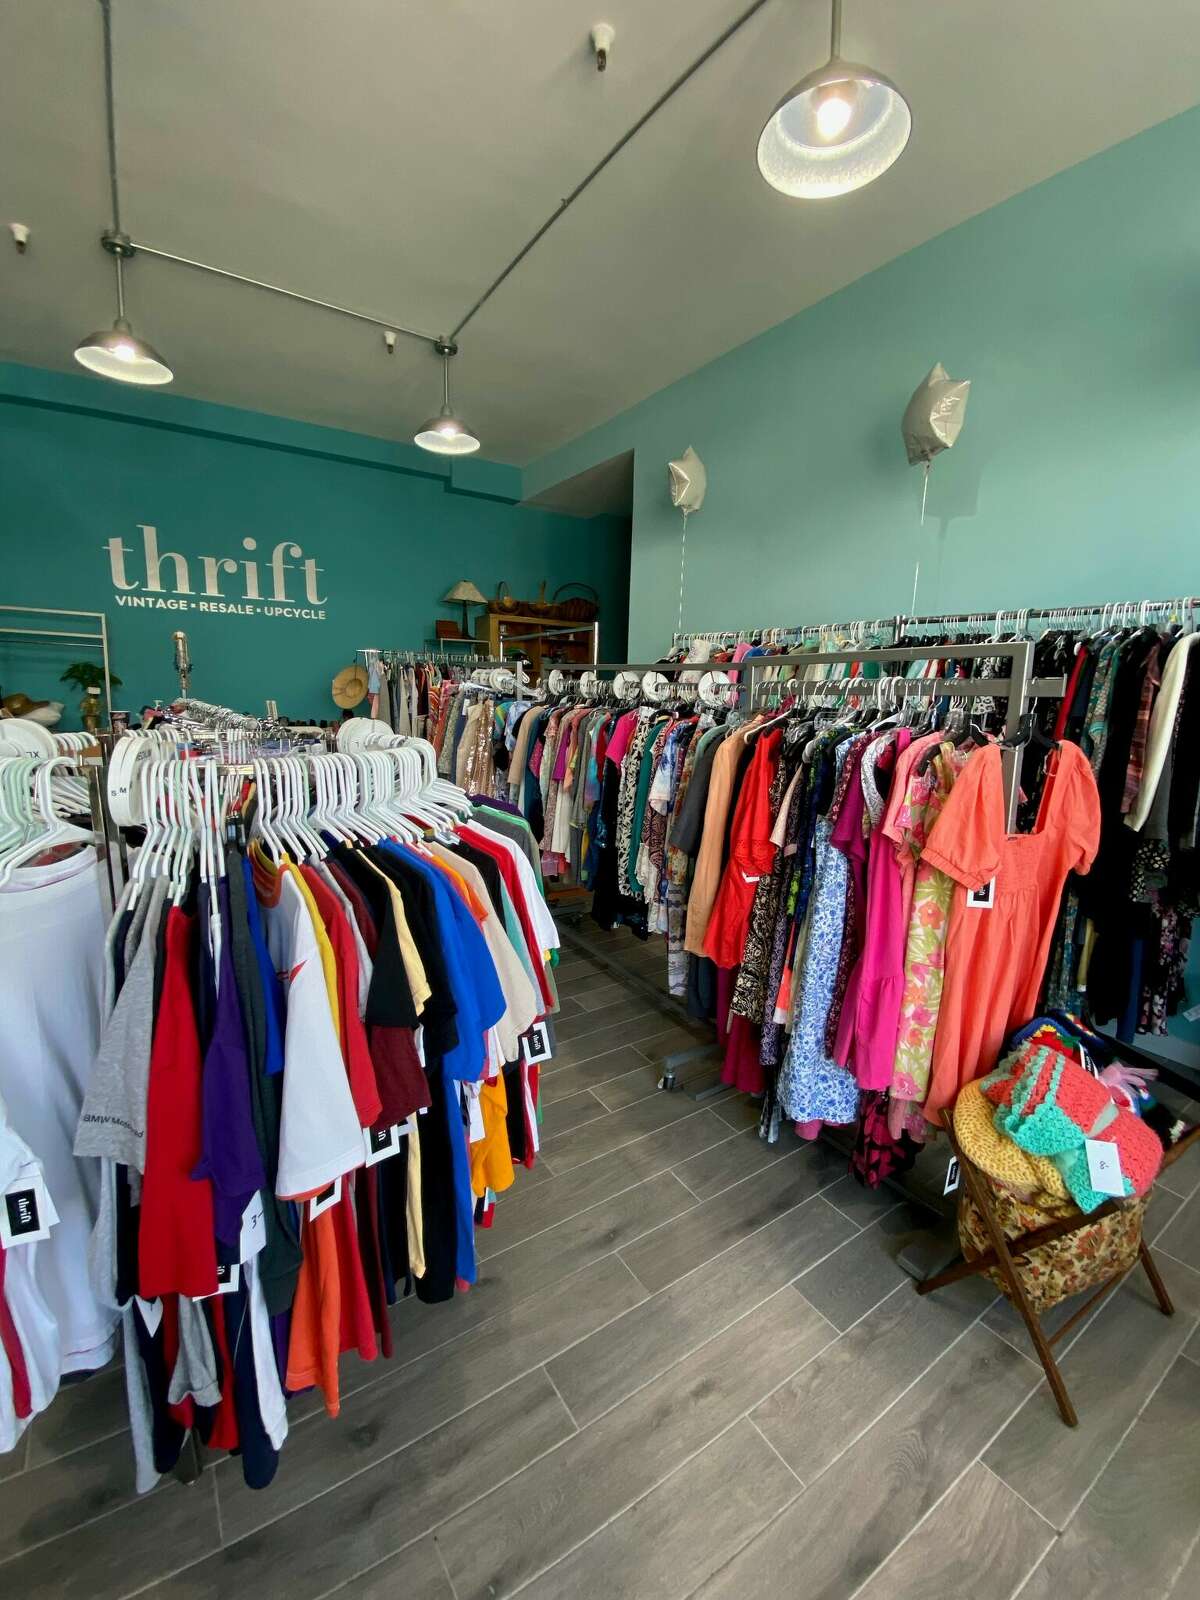 Thrift, a new thrift store that sells vintage and used clothes, located on Norwalk's Wall Street opened in May 21. 